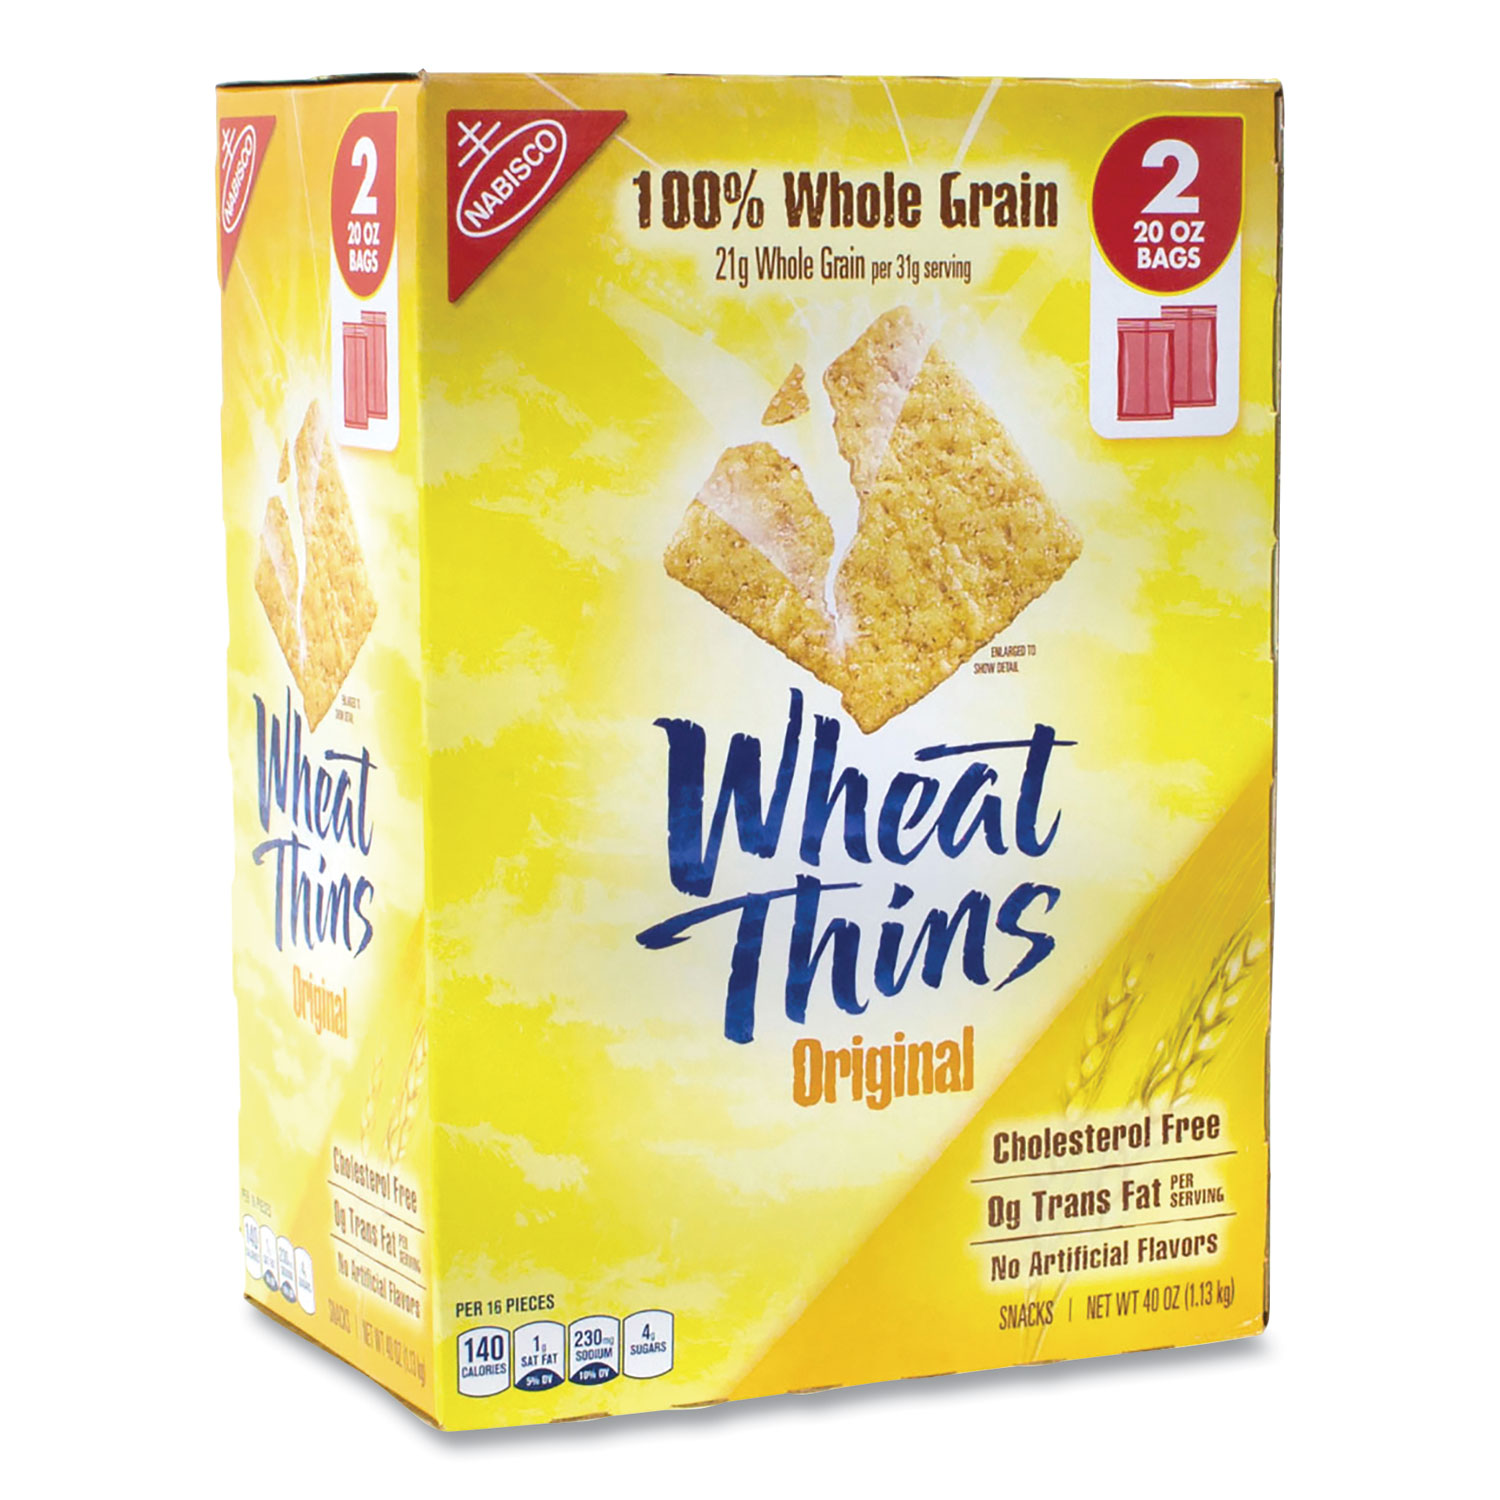  Nabisco 12465 Wheat Thins Crackers, Original, 20 oz Bag, 2 Bags/Box, Free Delivery in 1-4 Business Days (GRR22000087) 